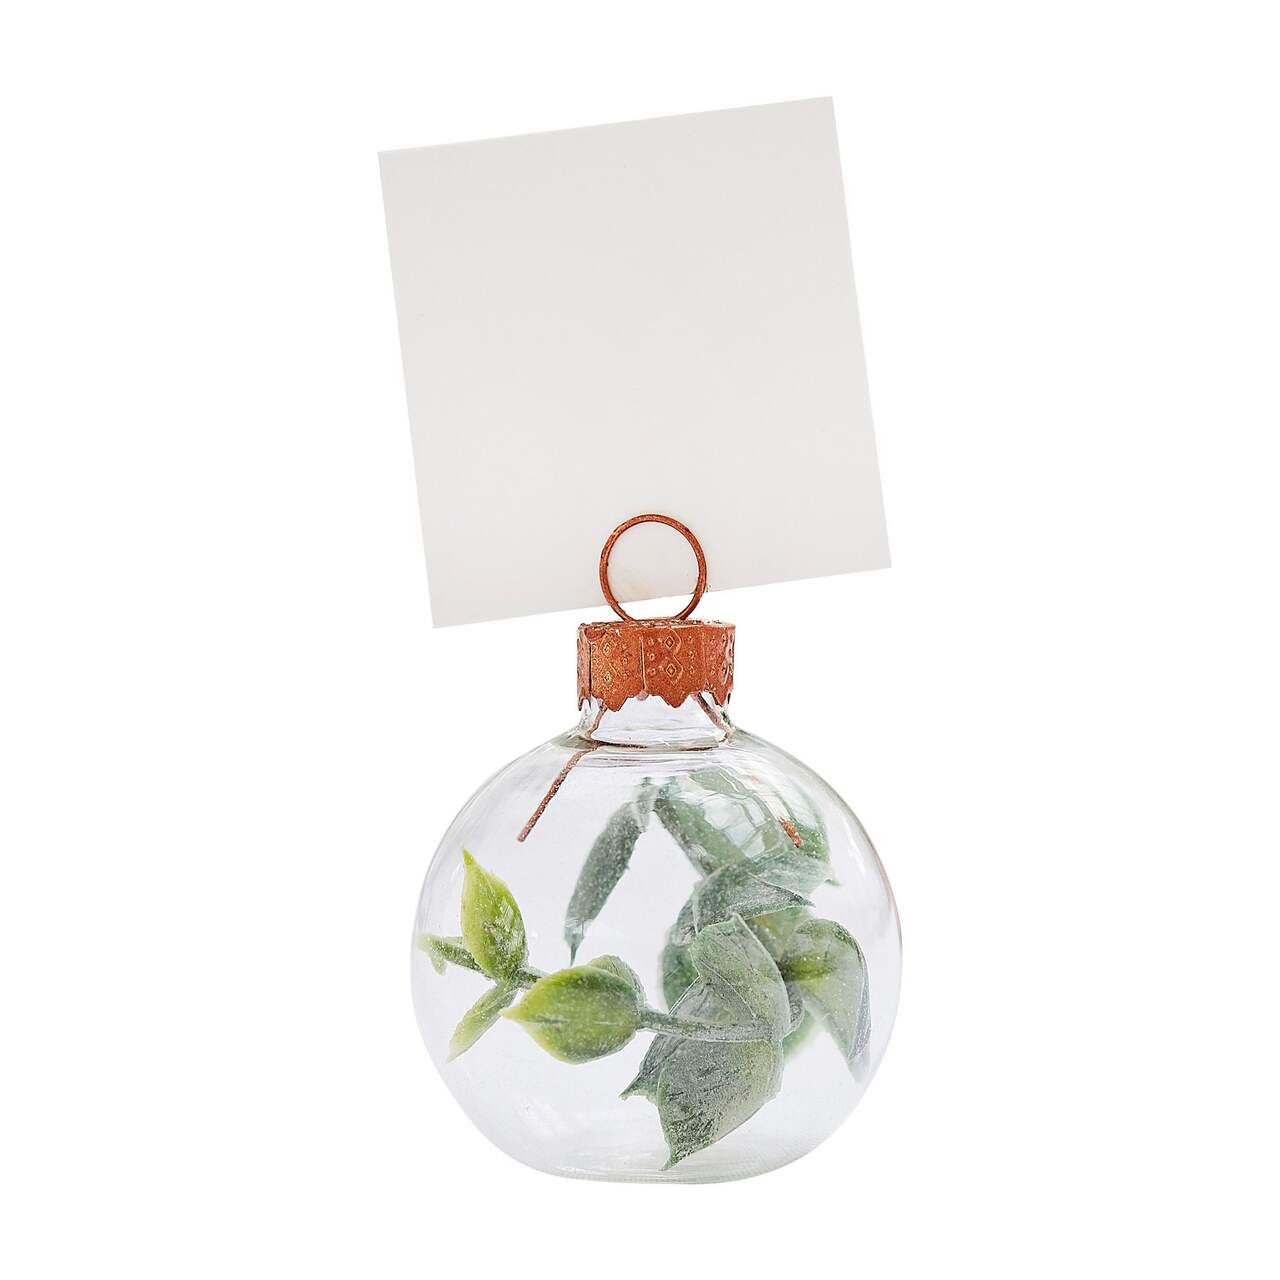 Ginger Ray 6 Glass Bauble Place Card Holders with Eucalyptus Sprigs RRP 8.99 CLEARANCE XL 4.99